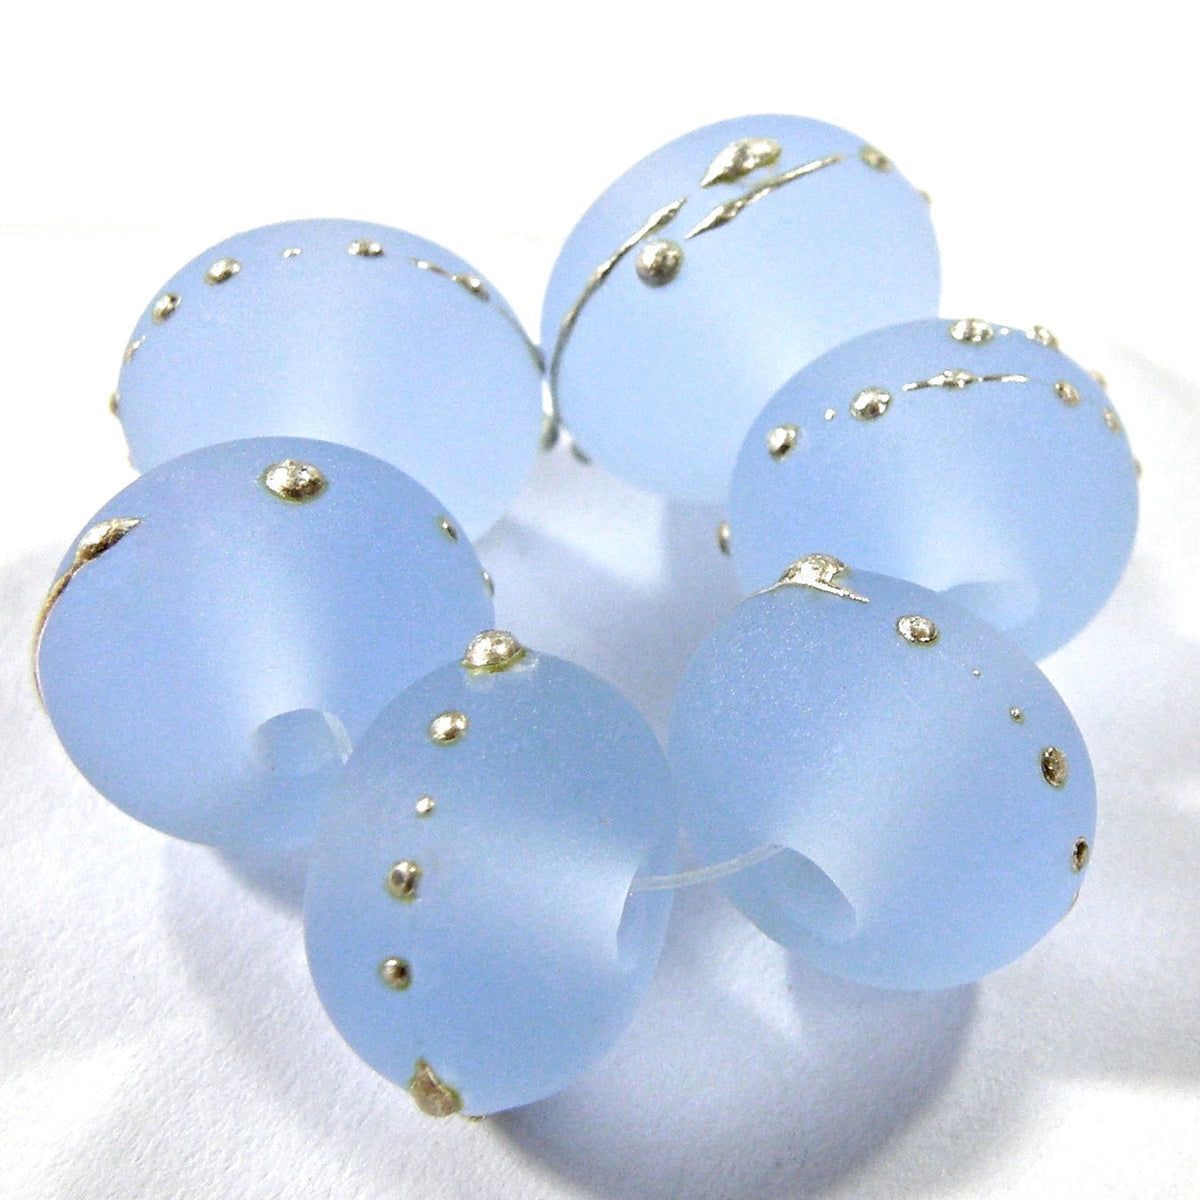 #Handmade #Lampwork #Glass #Beads, Pale #Blue Silver Etched Matte Frosted 050efs bit.ly/PaleBlueBeads0… #bmecountdown #LampworkGlassBeads #LampworkBeads #HandmadeBeads #JewelryMakingBeads #JewelryBeads #JewelrySupplies #ShopSmall #SmallBusiness @Covergirlbeads